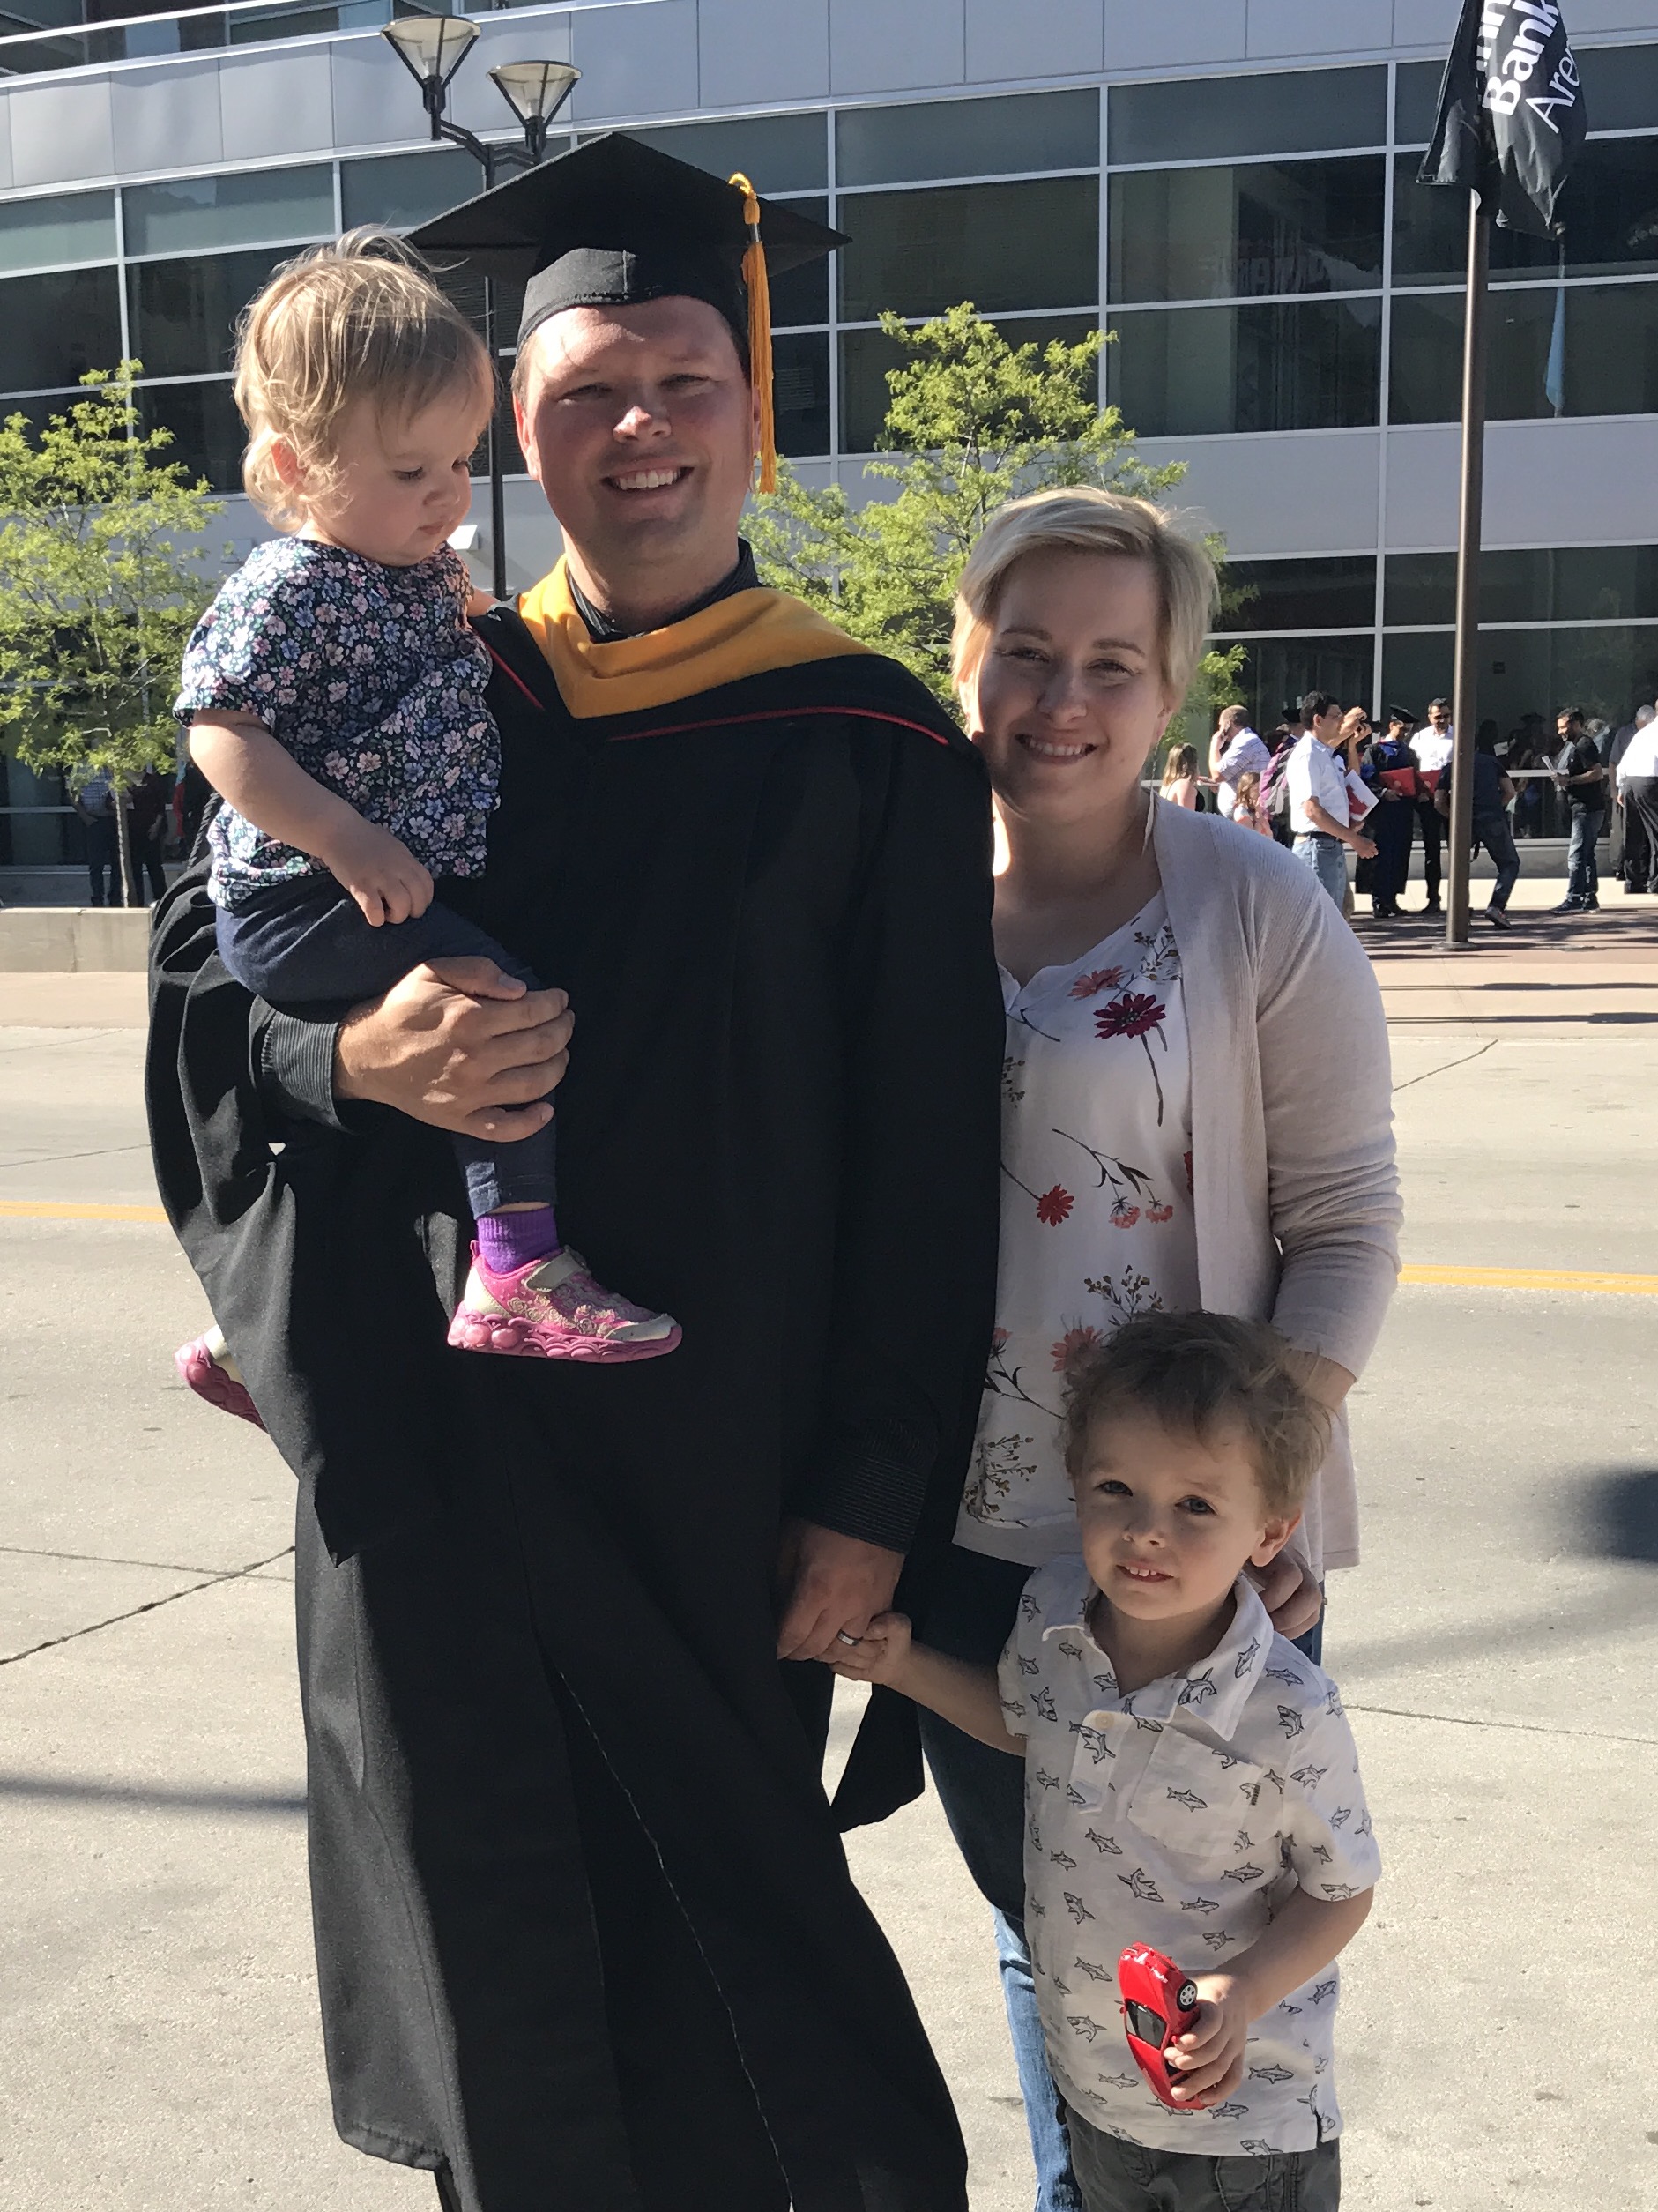 Brad Goetsch with Sara (spouse), Lily, and Logan at UNL's Graduation Ceremony for the Graduate College.